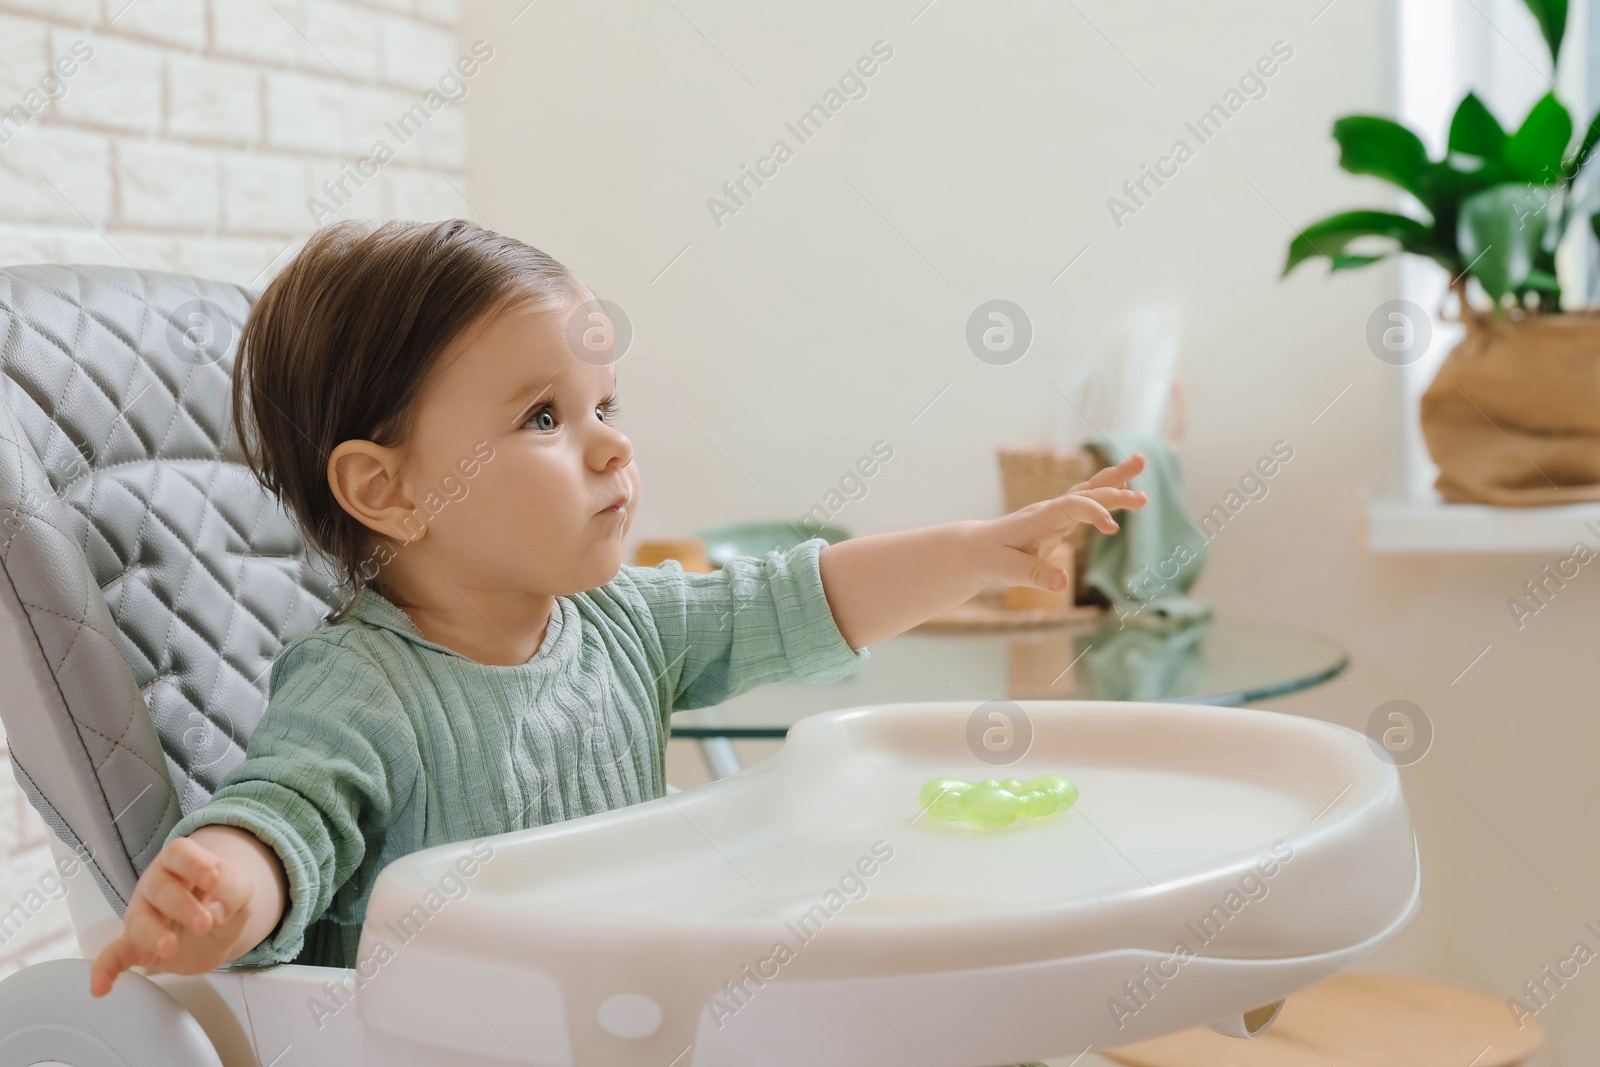 Photo of Cute little baby sitting in high chair indoors